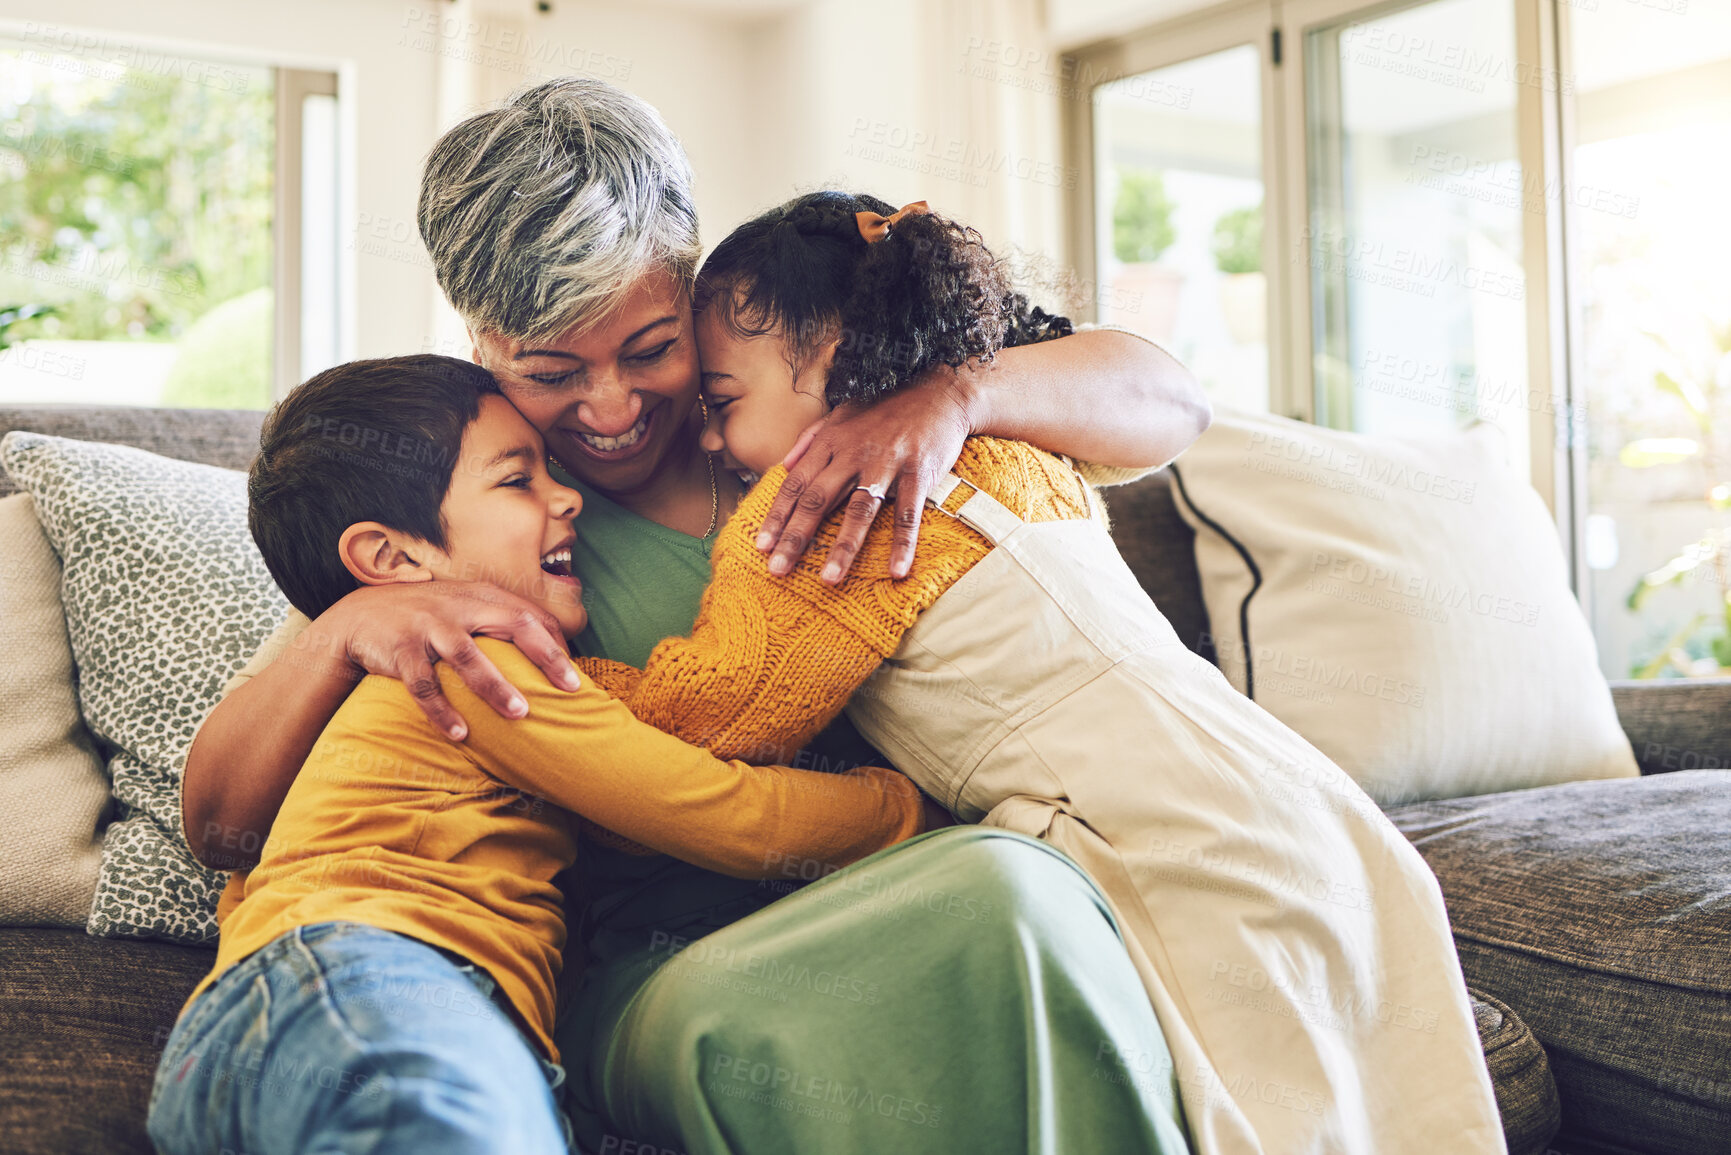 Buy stock photo Hug, grandma or happy kids on a sofa with love enjoying quality bonding time together in family home. Smile, affection or senior grandmother relaxing with young children siblings on house couch 